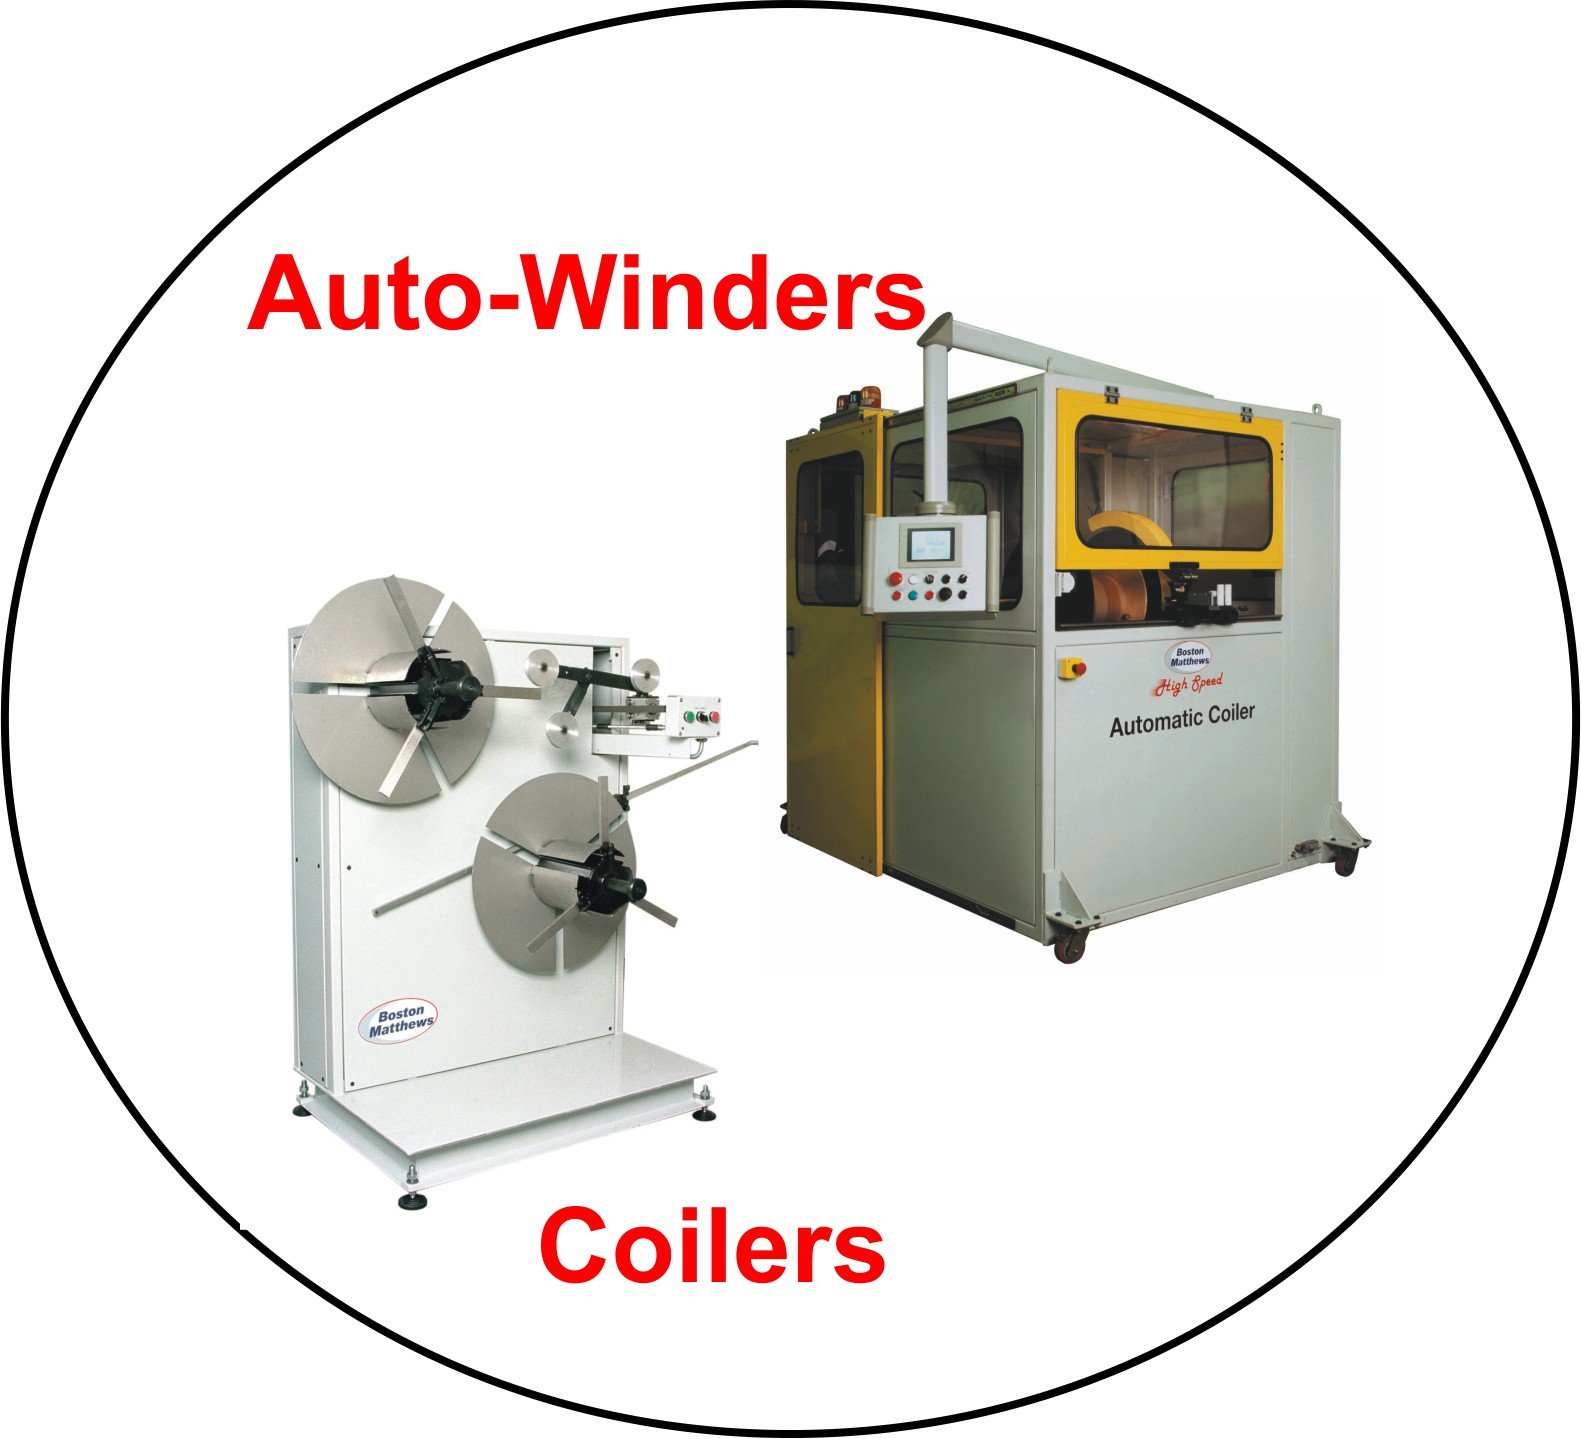 Coilers and Winders without border.jpg